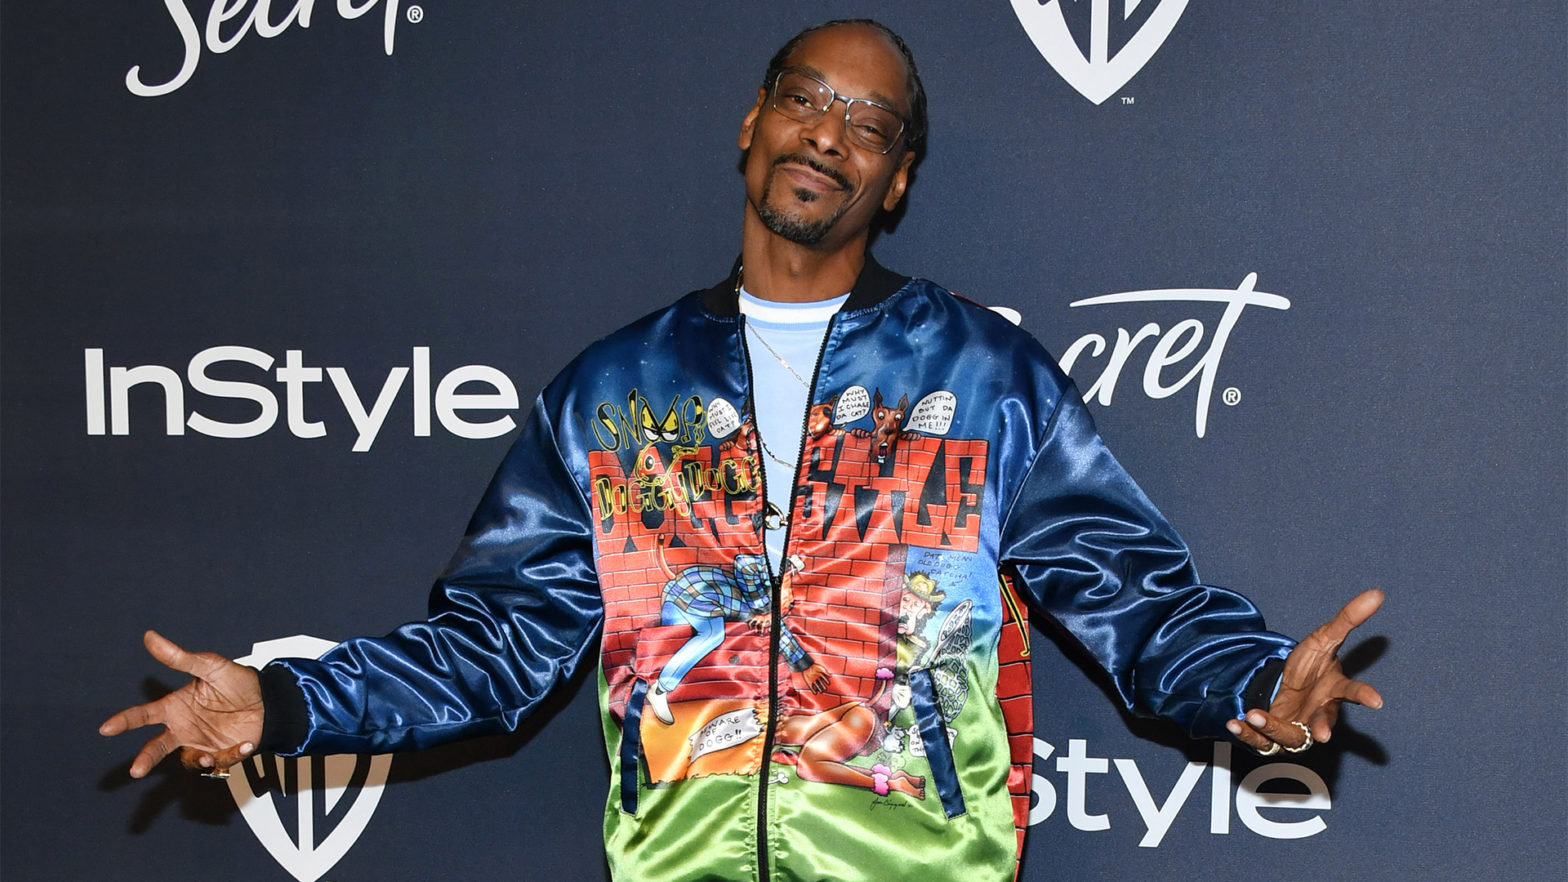 Snoop Dogg Builds Breakfast Food Empire In Response To Seeing A 'Void For Our Culture' After They Removed 'Aunt Jemima' From Shelves